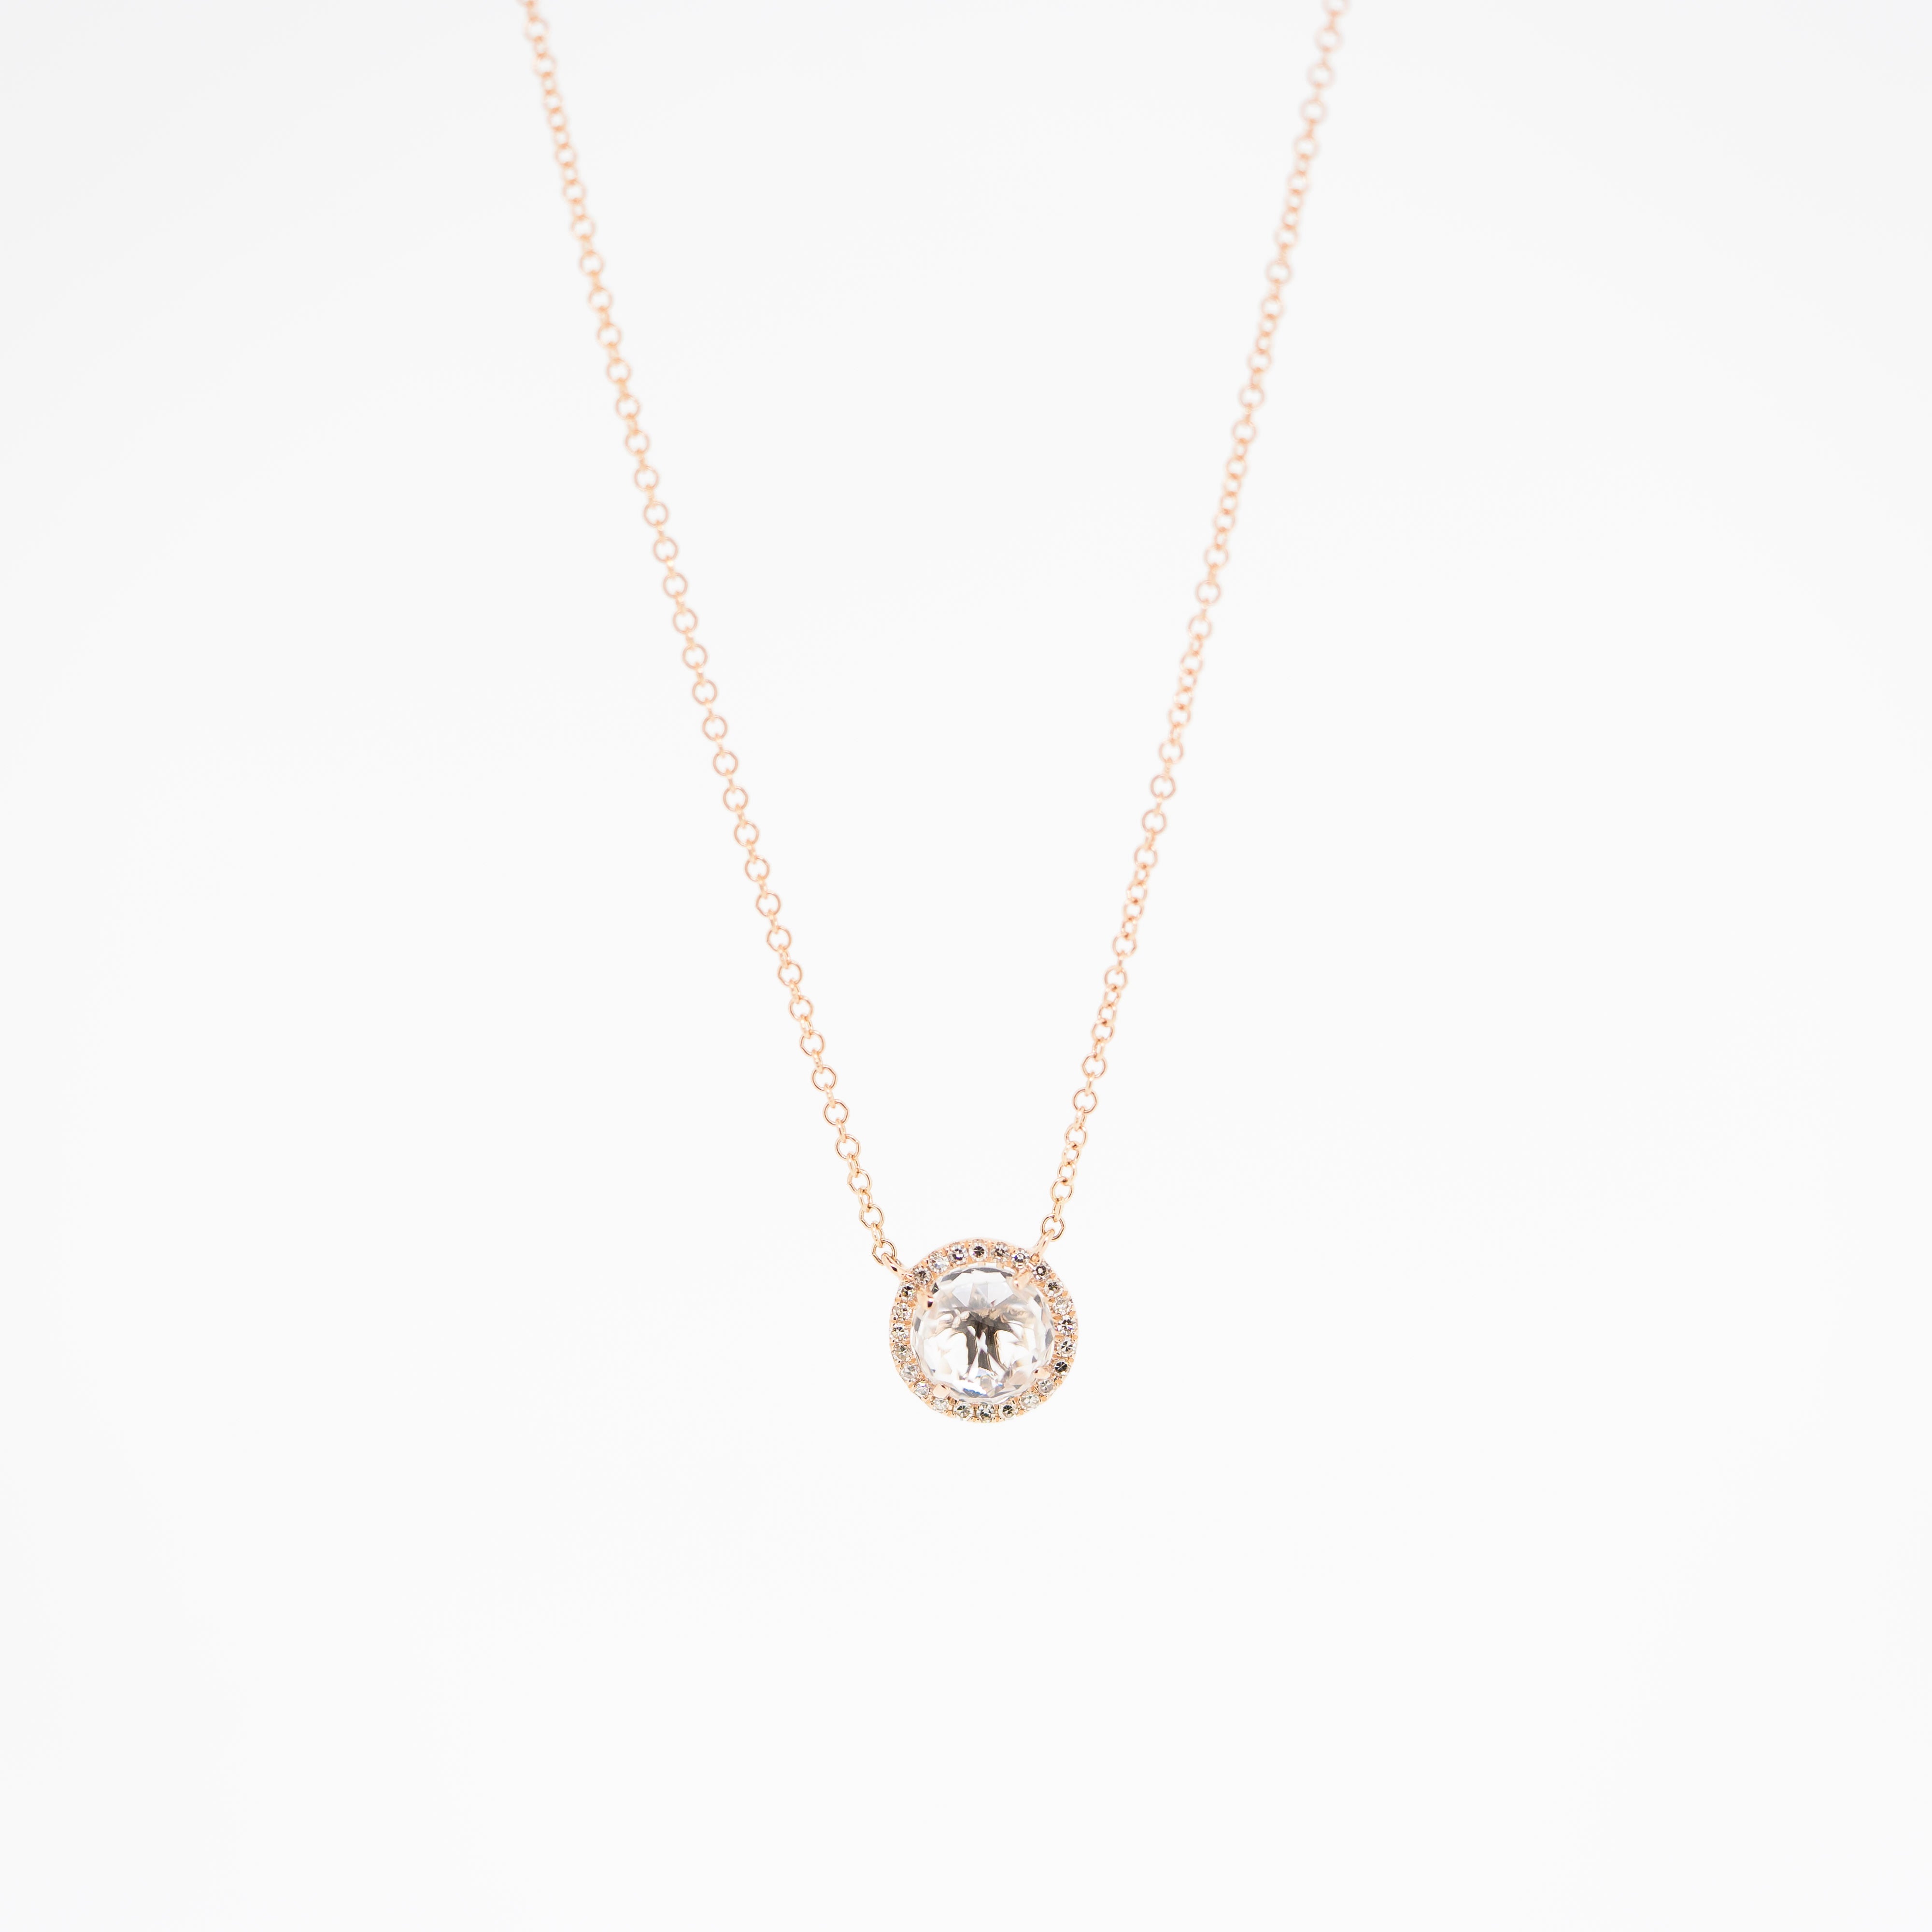 White Topaz Halo Necklace in Rose Gold